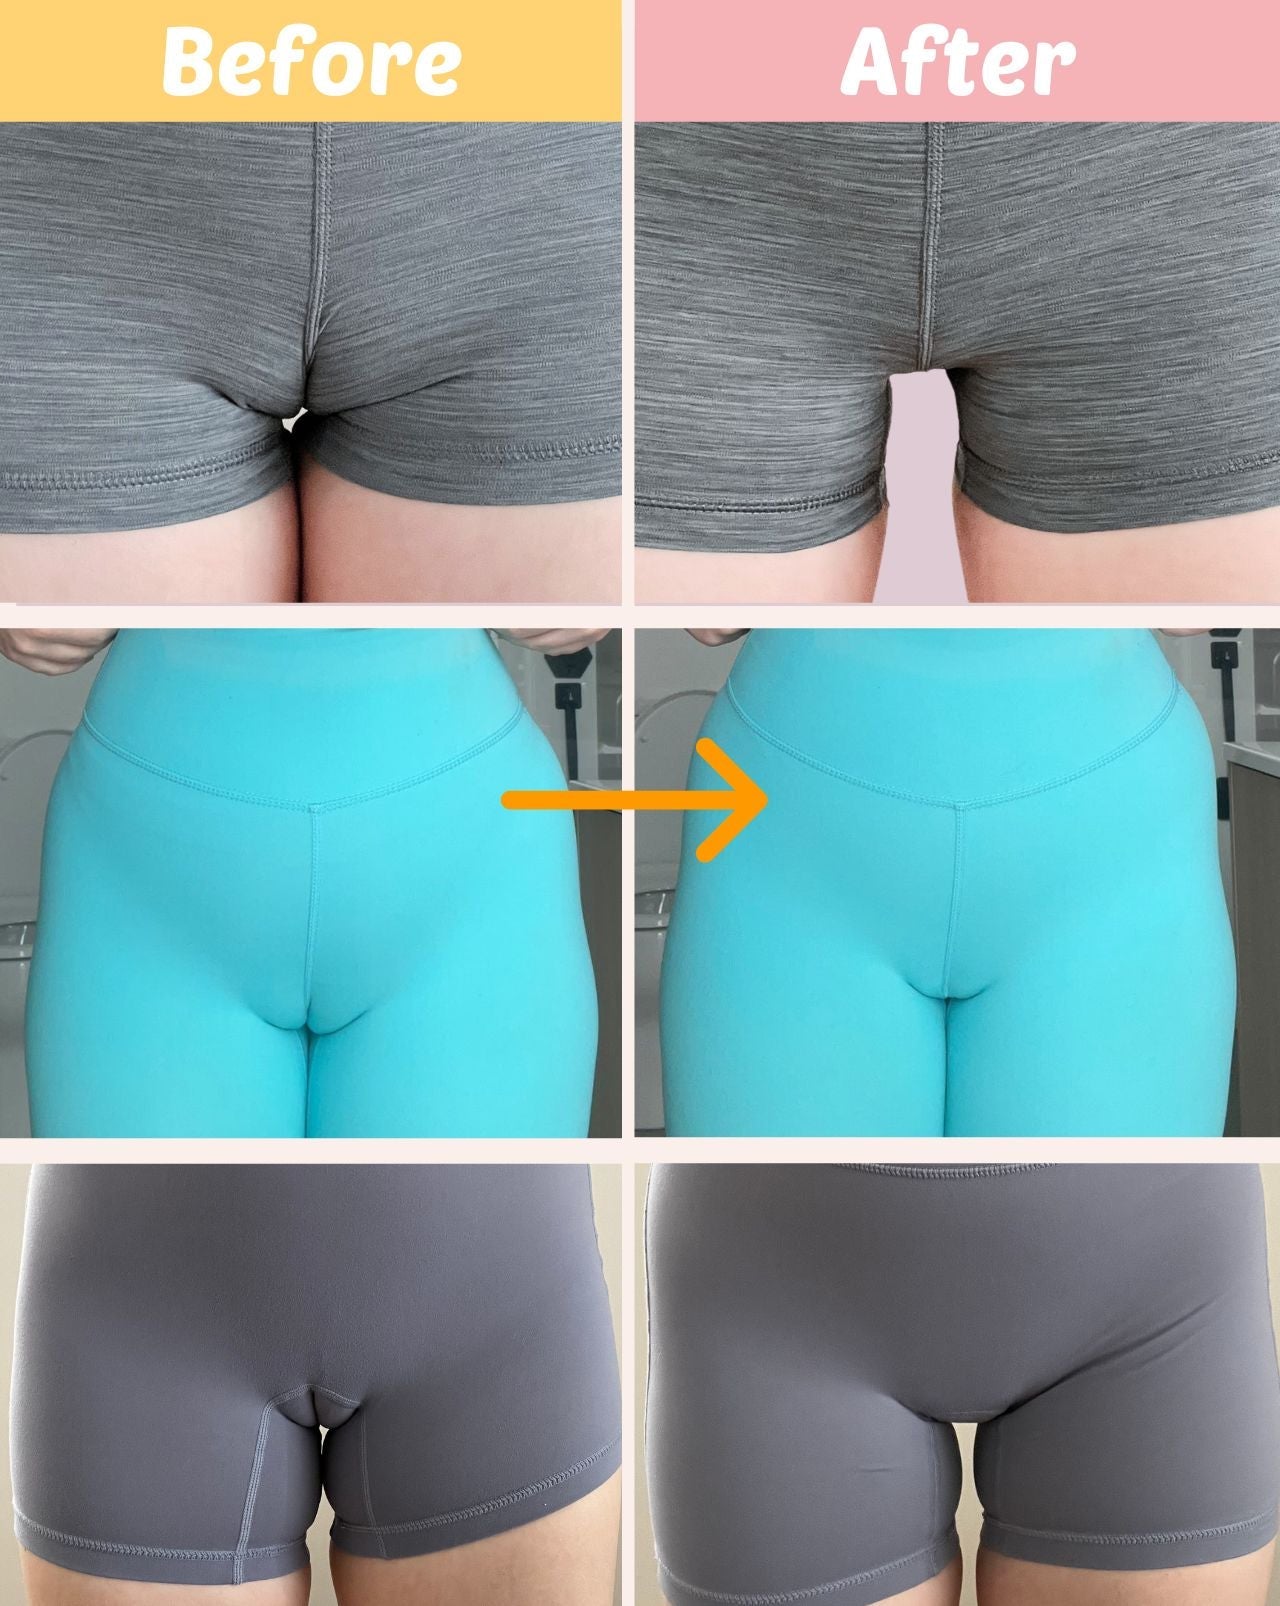 Product That Claims to Solve 'Front Wedgie